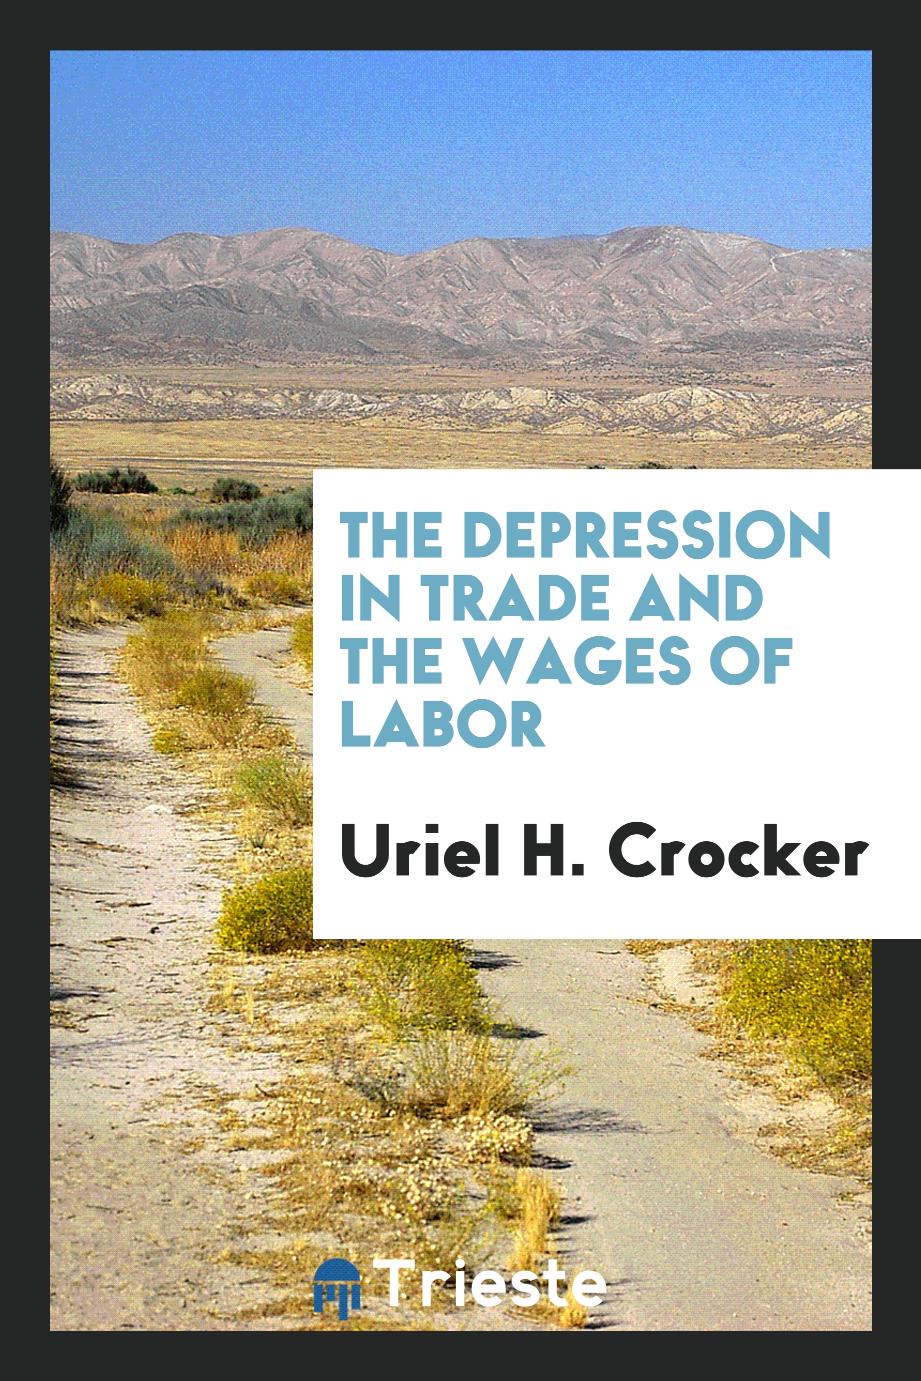 The Depression in Trade and the Wages of Labor